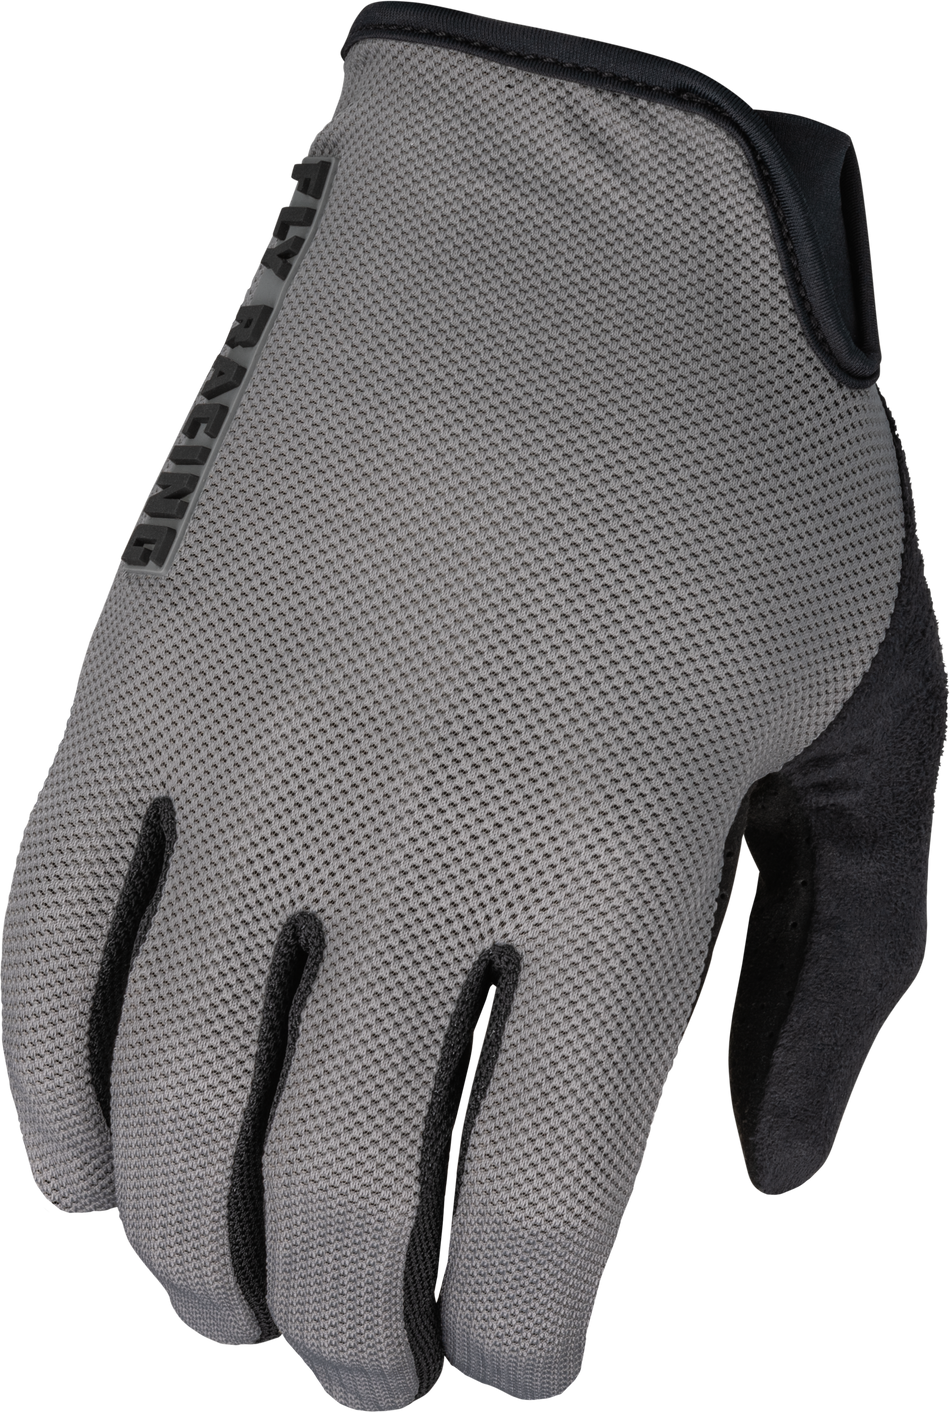 FLY RACING Mesh Gloves Grey Md 375-306M